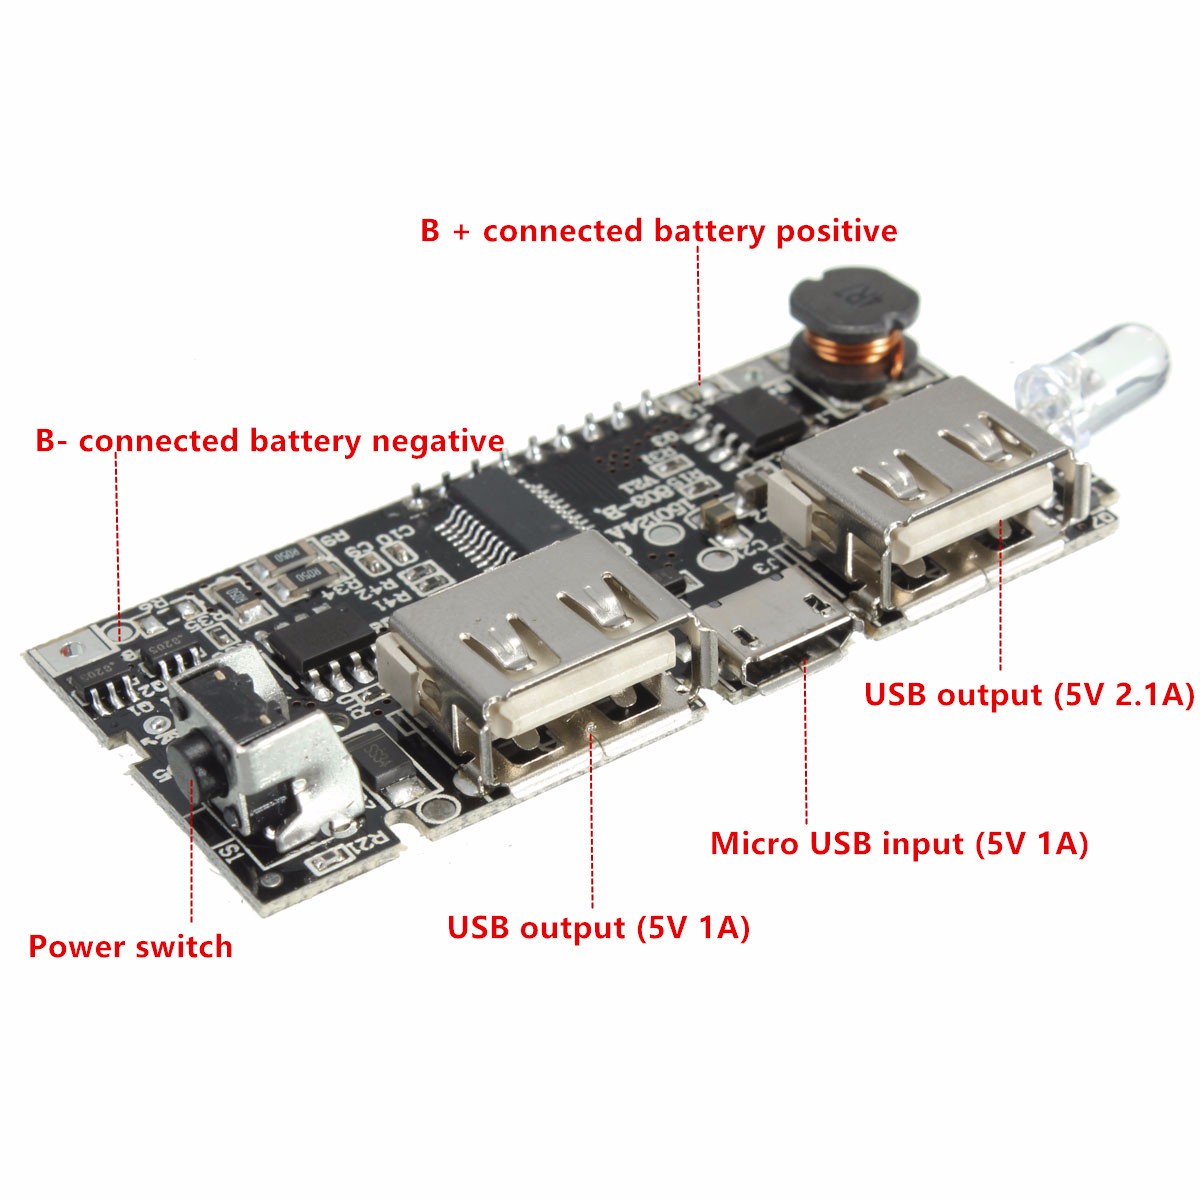 2Pcs-Dual-USB-5V-1A-21A-Mobile-Power-Bank-18650-Battery-Charger-PCB-Module-Board-1365765